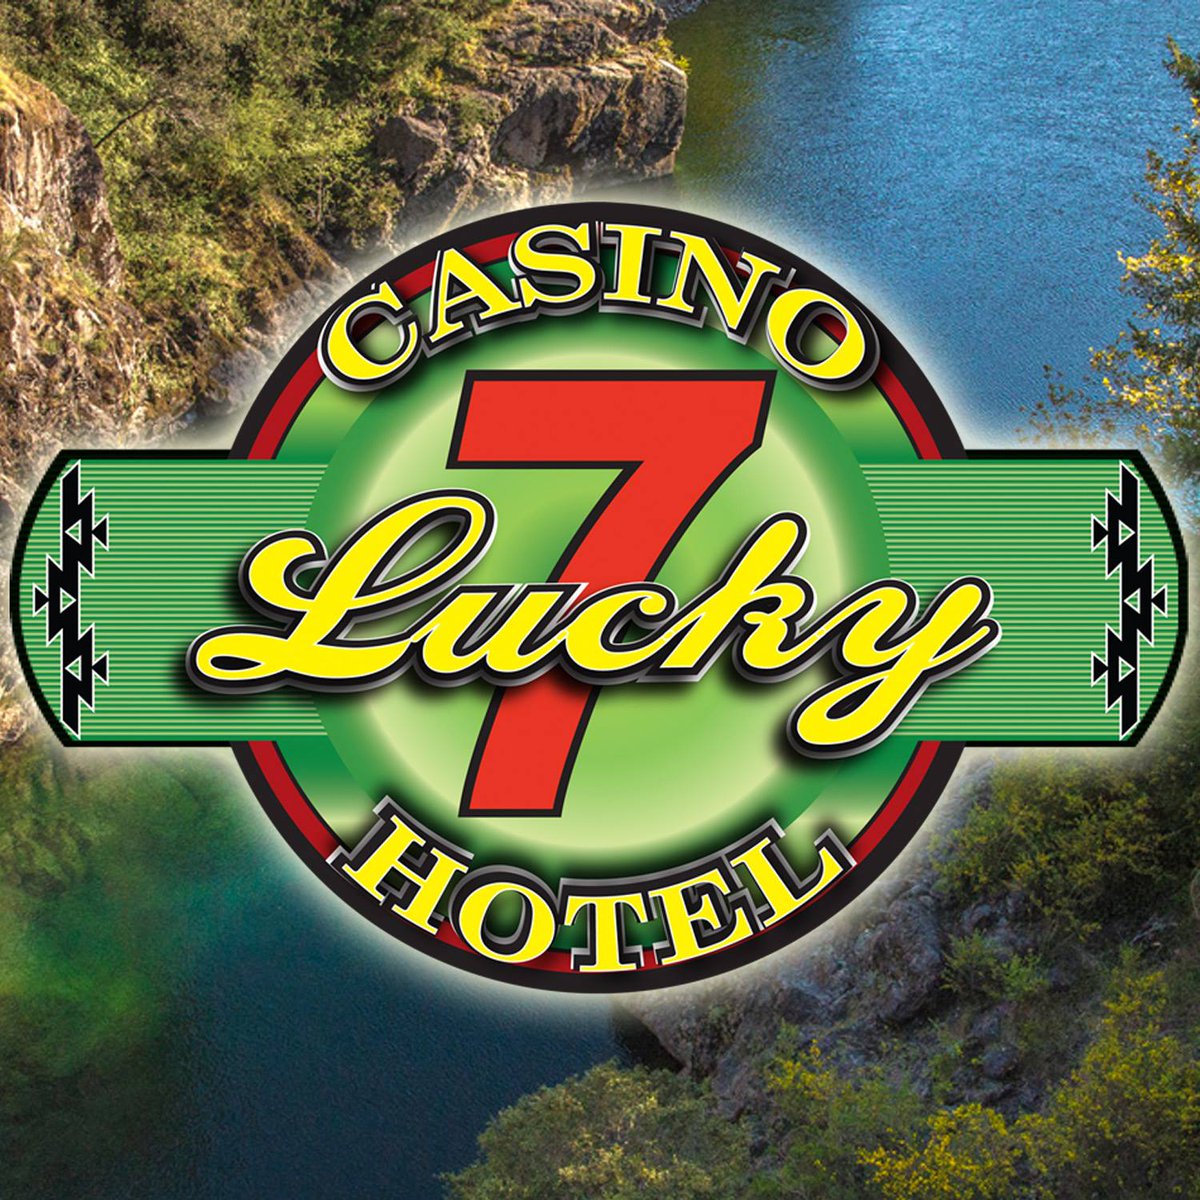 Lucky 7 Casino is hiring for a General Manager
Relocation Assistance. Great benefits! 
Click on the link below for more details and apply to the General Manager.
#hiring #jobs #careers #casino #hospitality #generalmanager #GM
casinocareers.com/jobs/4028581-g…